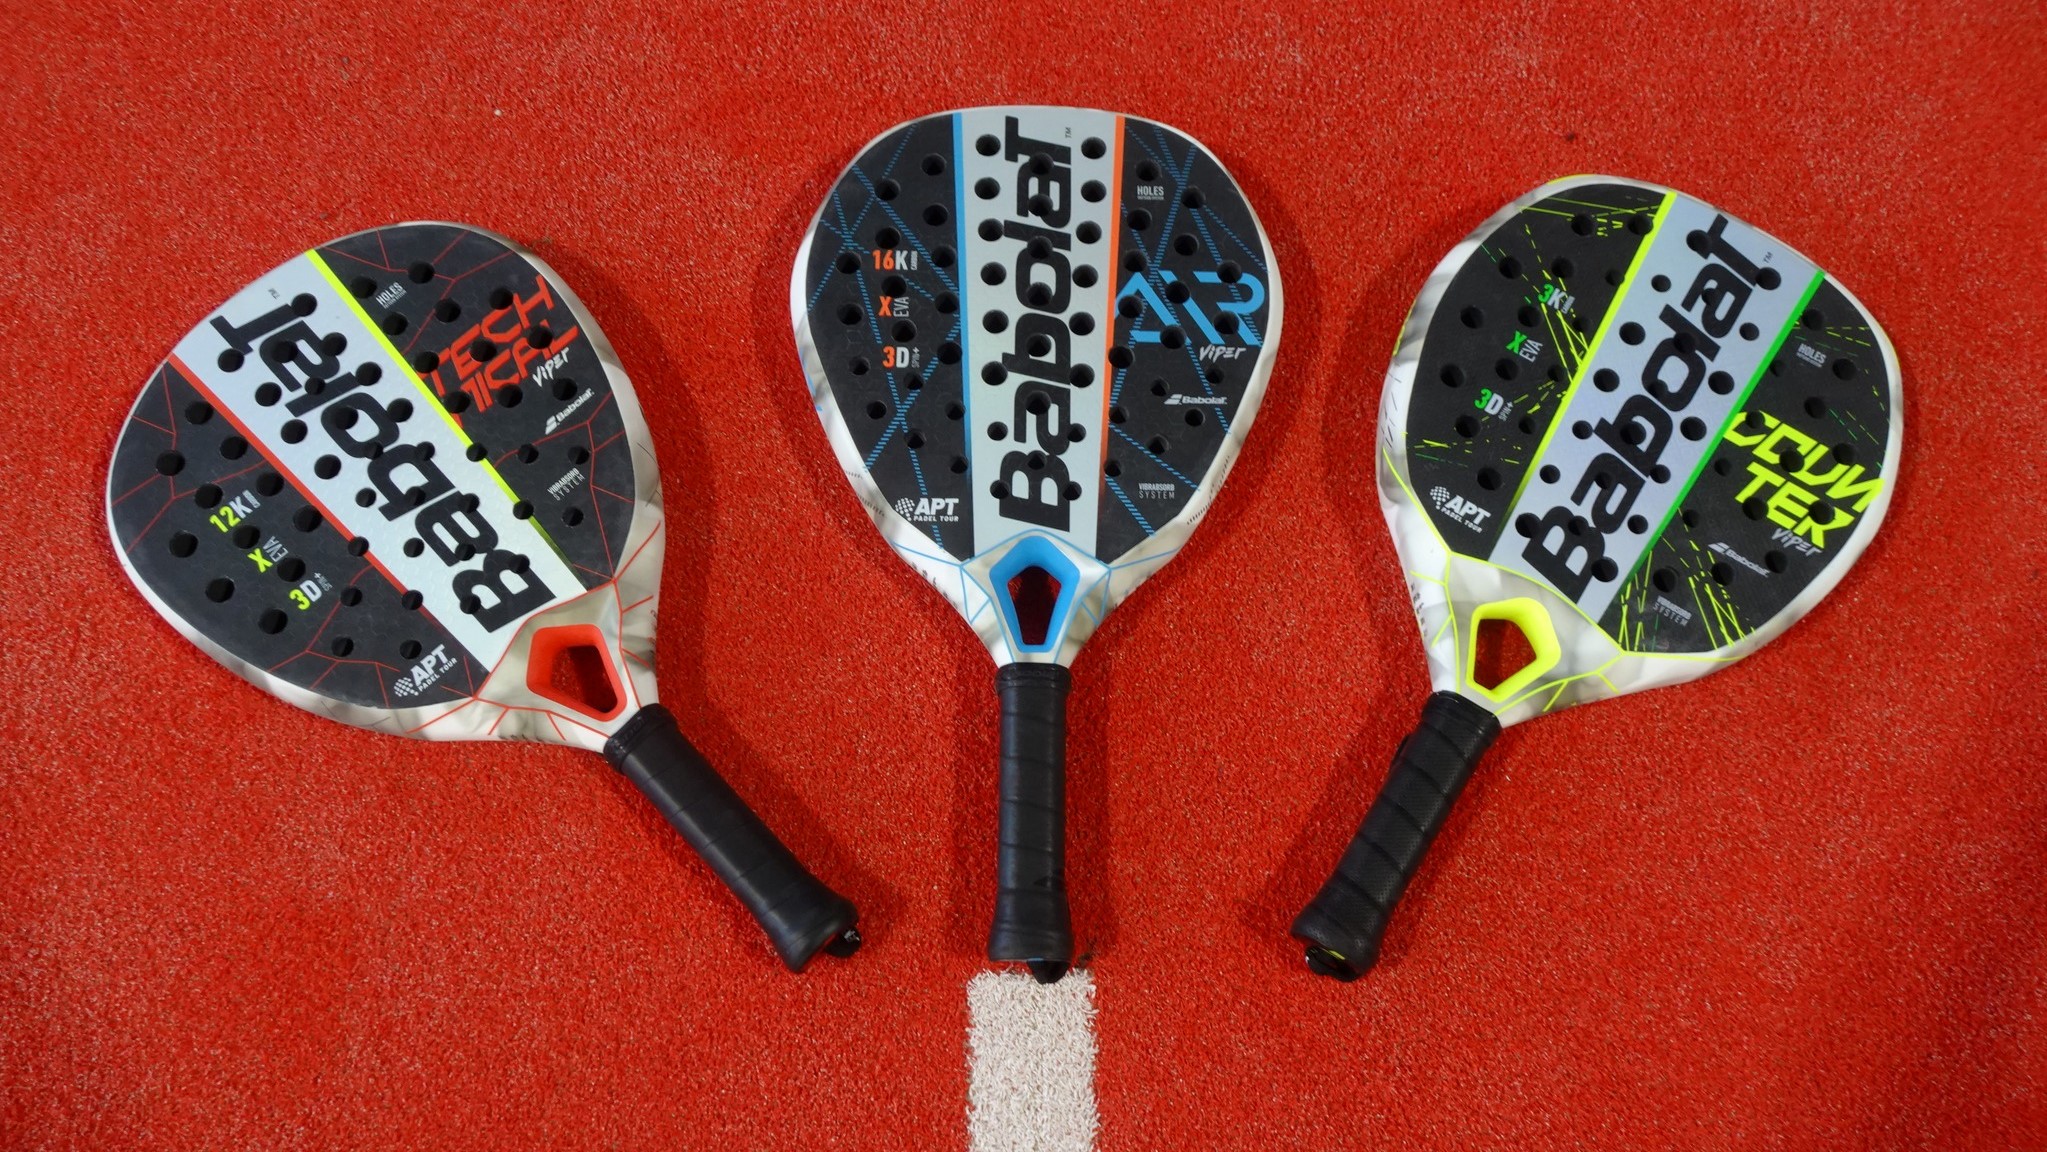 Babolat presents the official palas of the APT Padel Tour